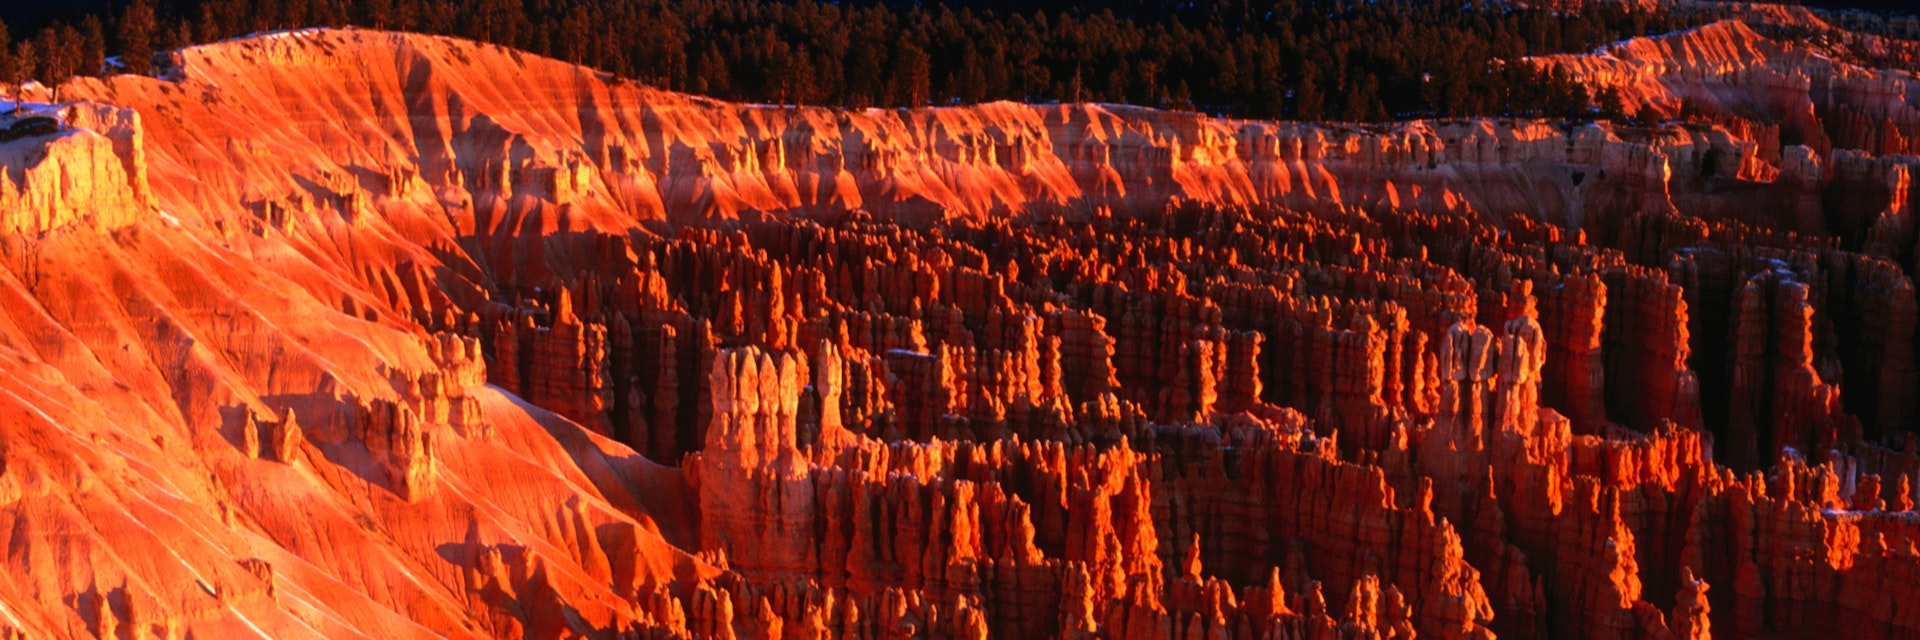 Winter time in Bryce Canyon National Park.